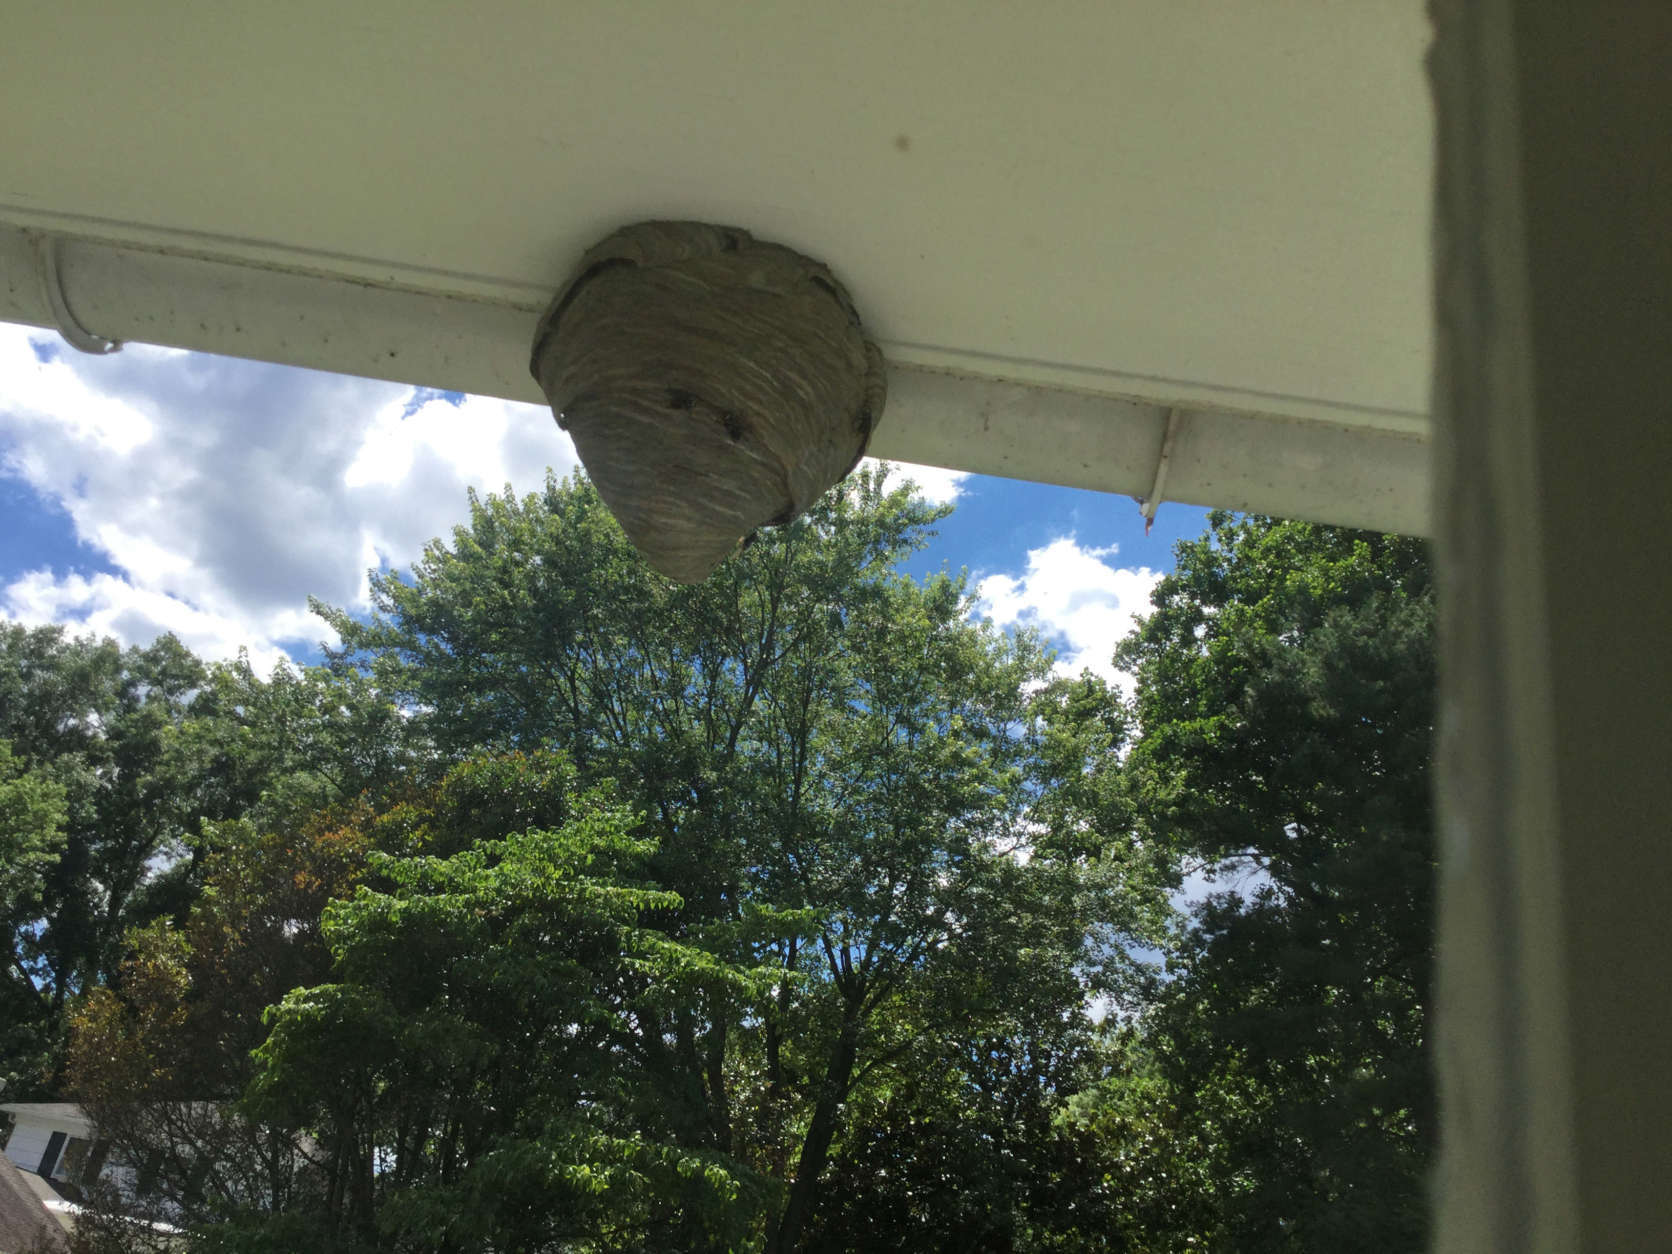 The somewhat-similar-looking nests of bald-faced hornets and European hornets max out at around 500 to 600 occupants in the fall, with each nest tending to be a little larger than a football. (Courtesy listener)